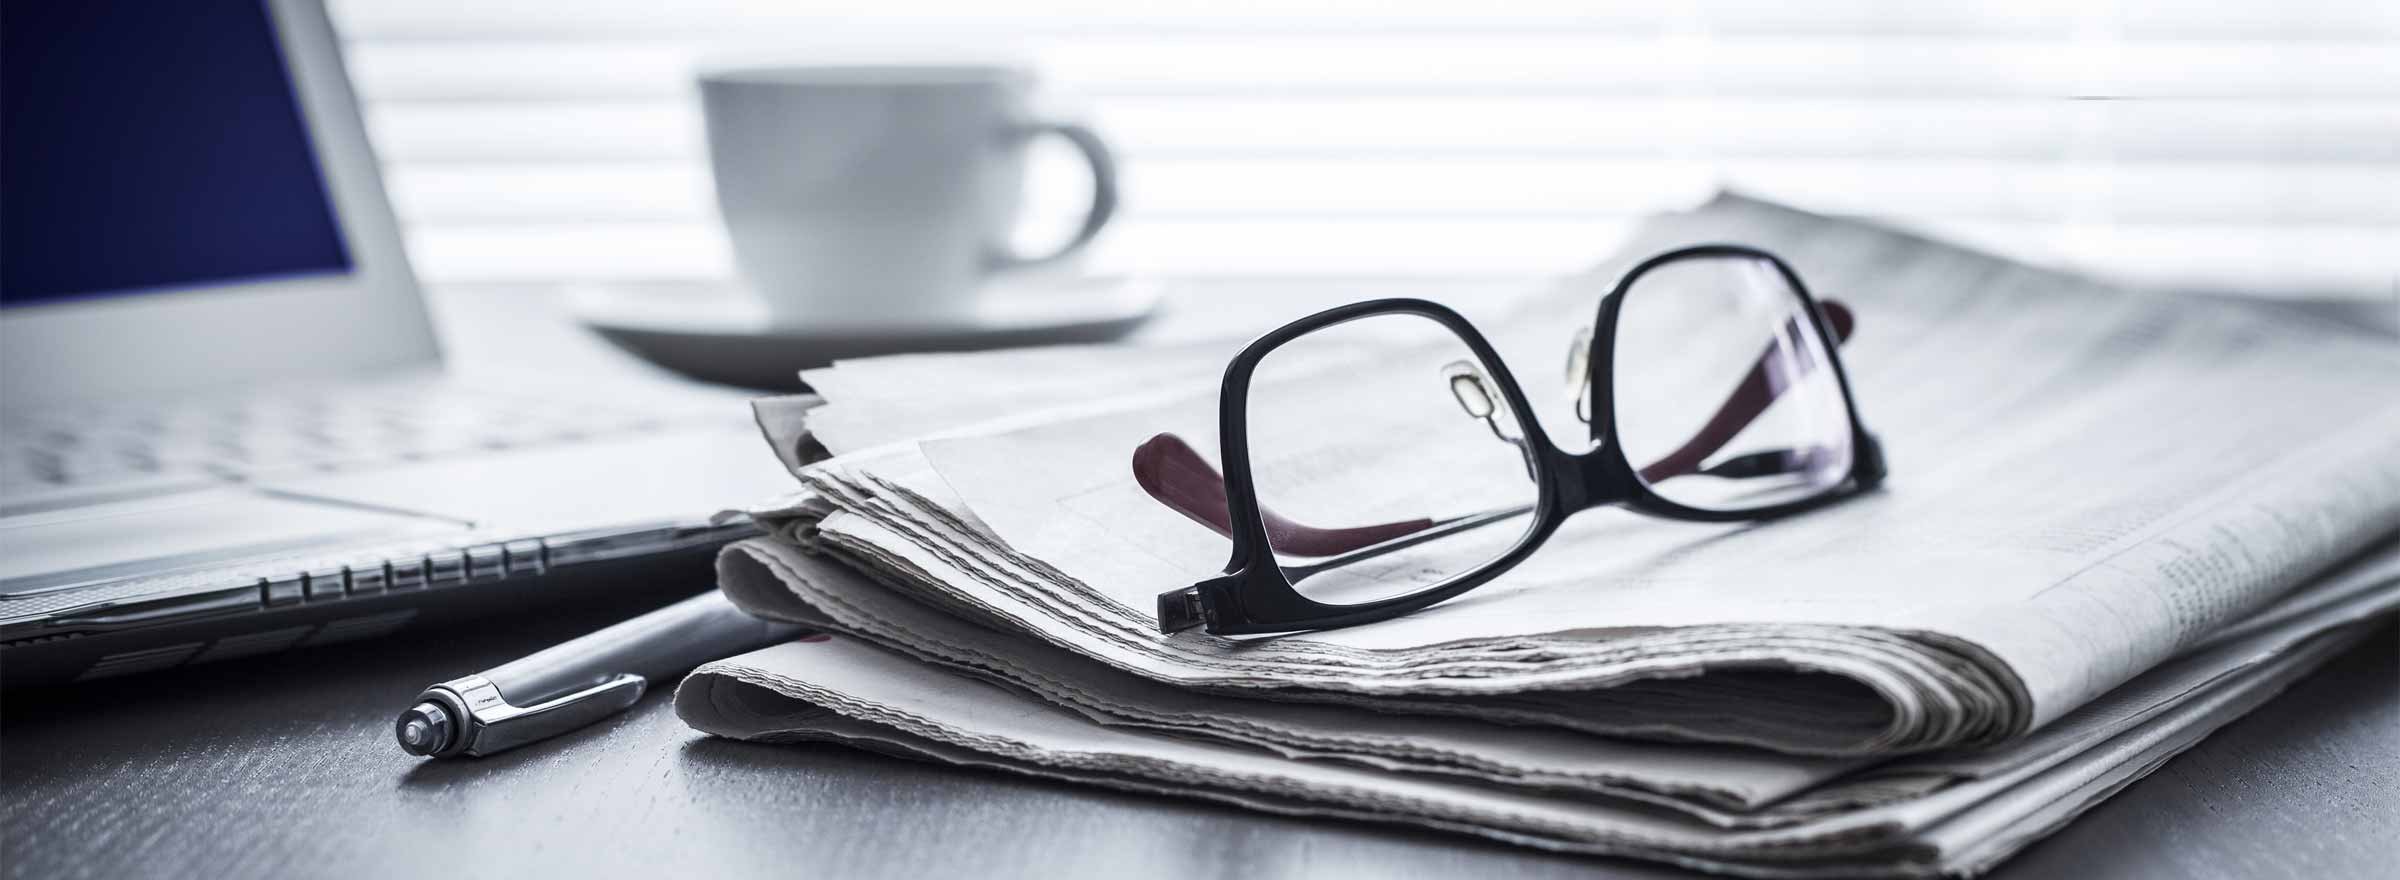 eyeglasses resting on a newspaper in front of a computer